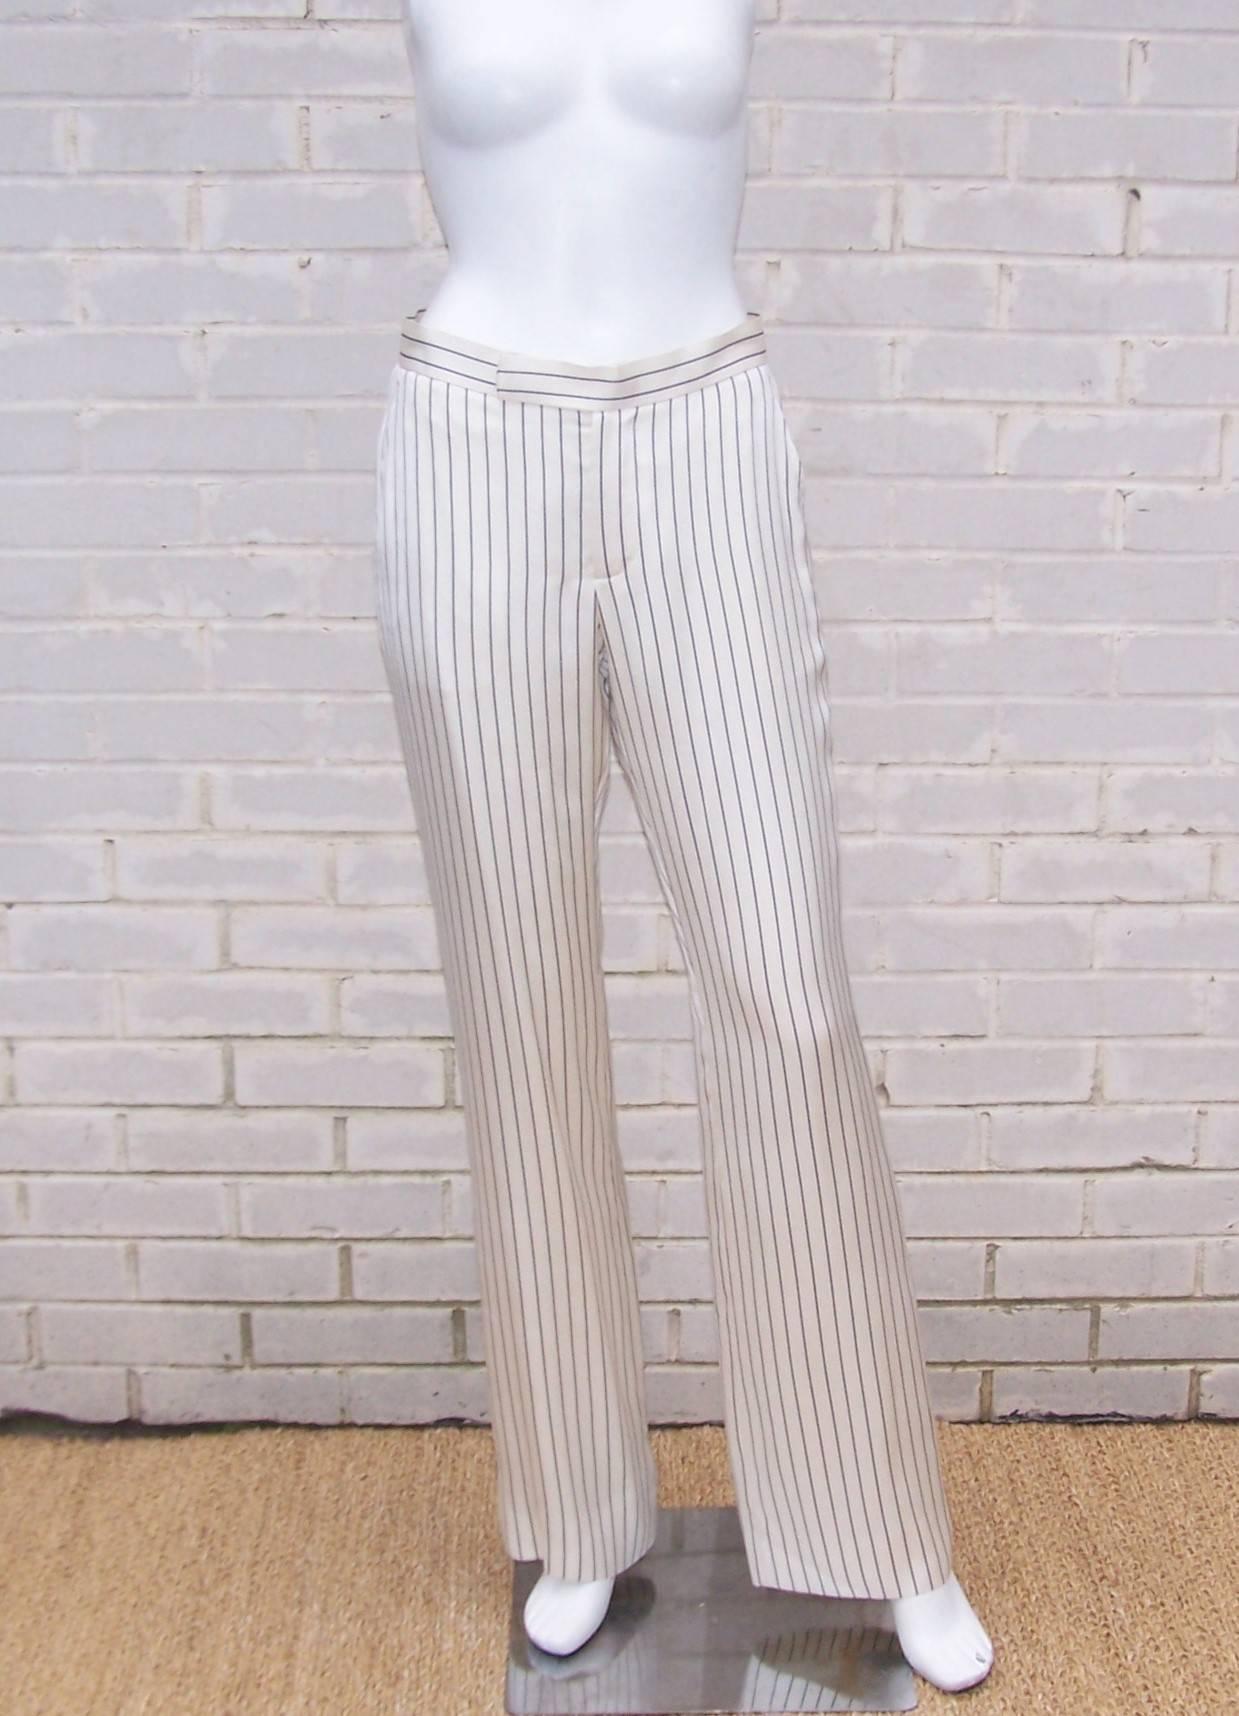 Take on a stylish gangster look with these c.1990 Ralph Lauren androgynous blue and white pinstriped silk pants.  The classic flat front menswear style features a relaxed waistband with zip front, tab closure and side pockets.  They are fully lined